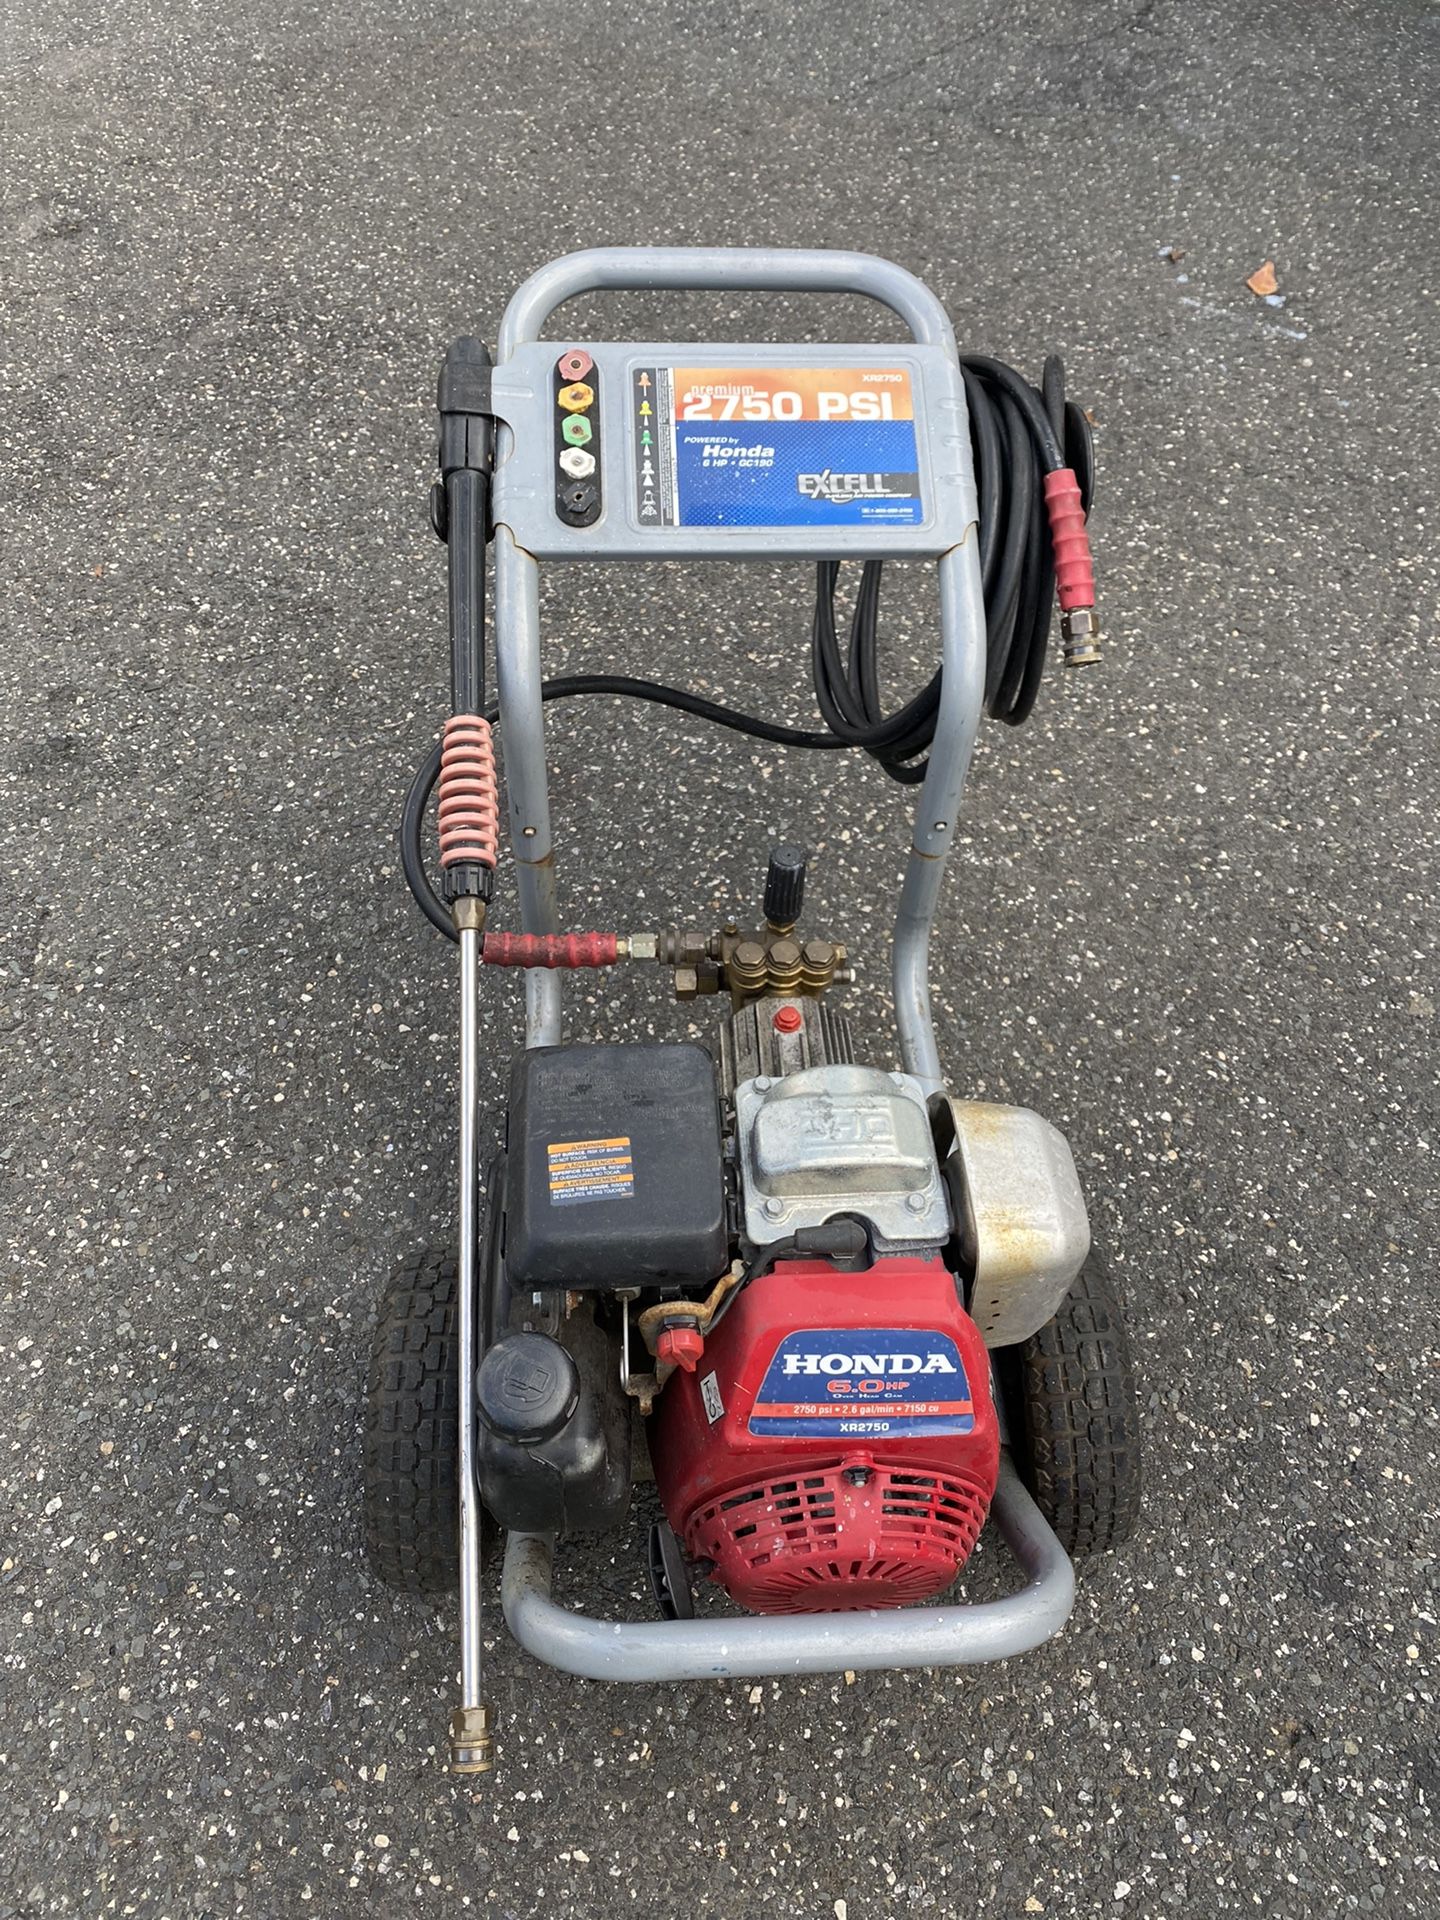 Honda XR2(contact info removed)PSI Pressure Washer 